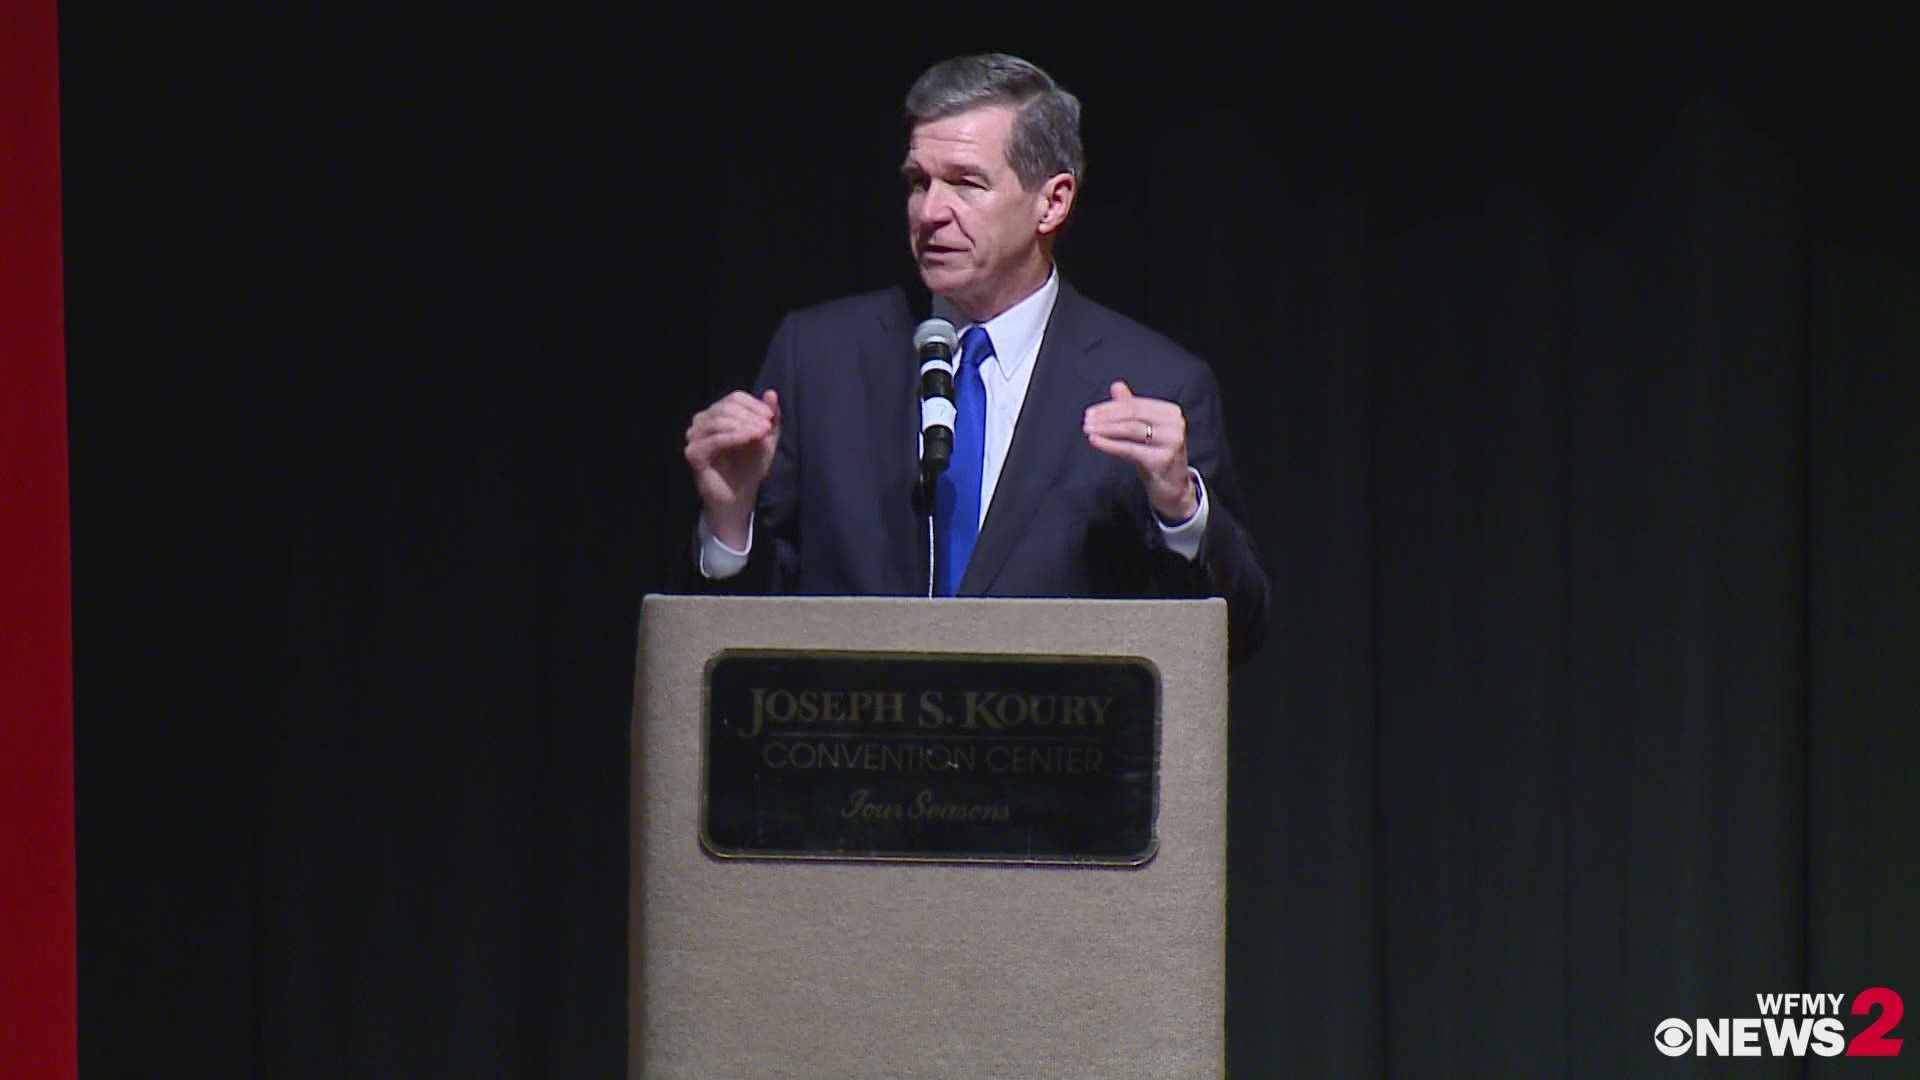 North Carolina Governor Roy Cooper talked about Dr. Martin Luther King Jr. and Bennett College's role in spreading King's message.